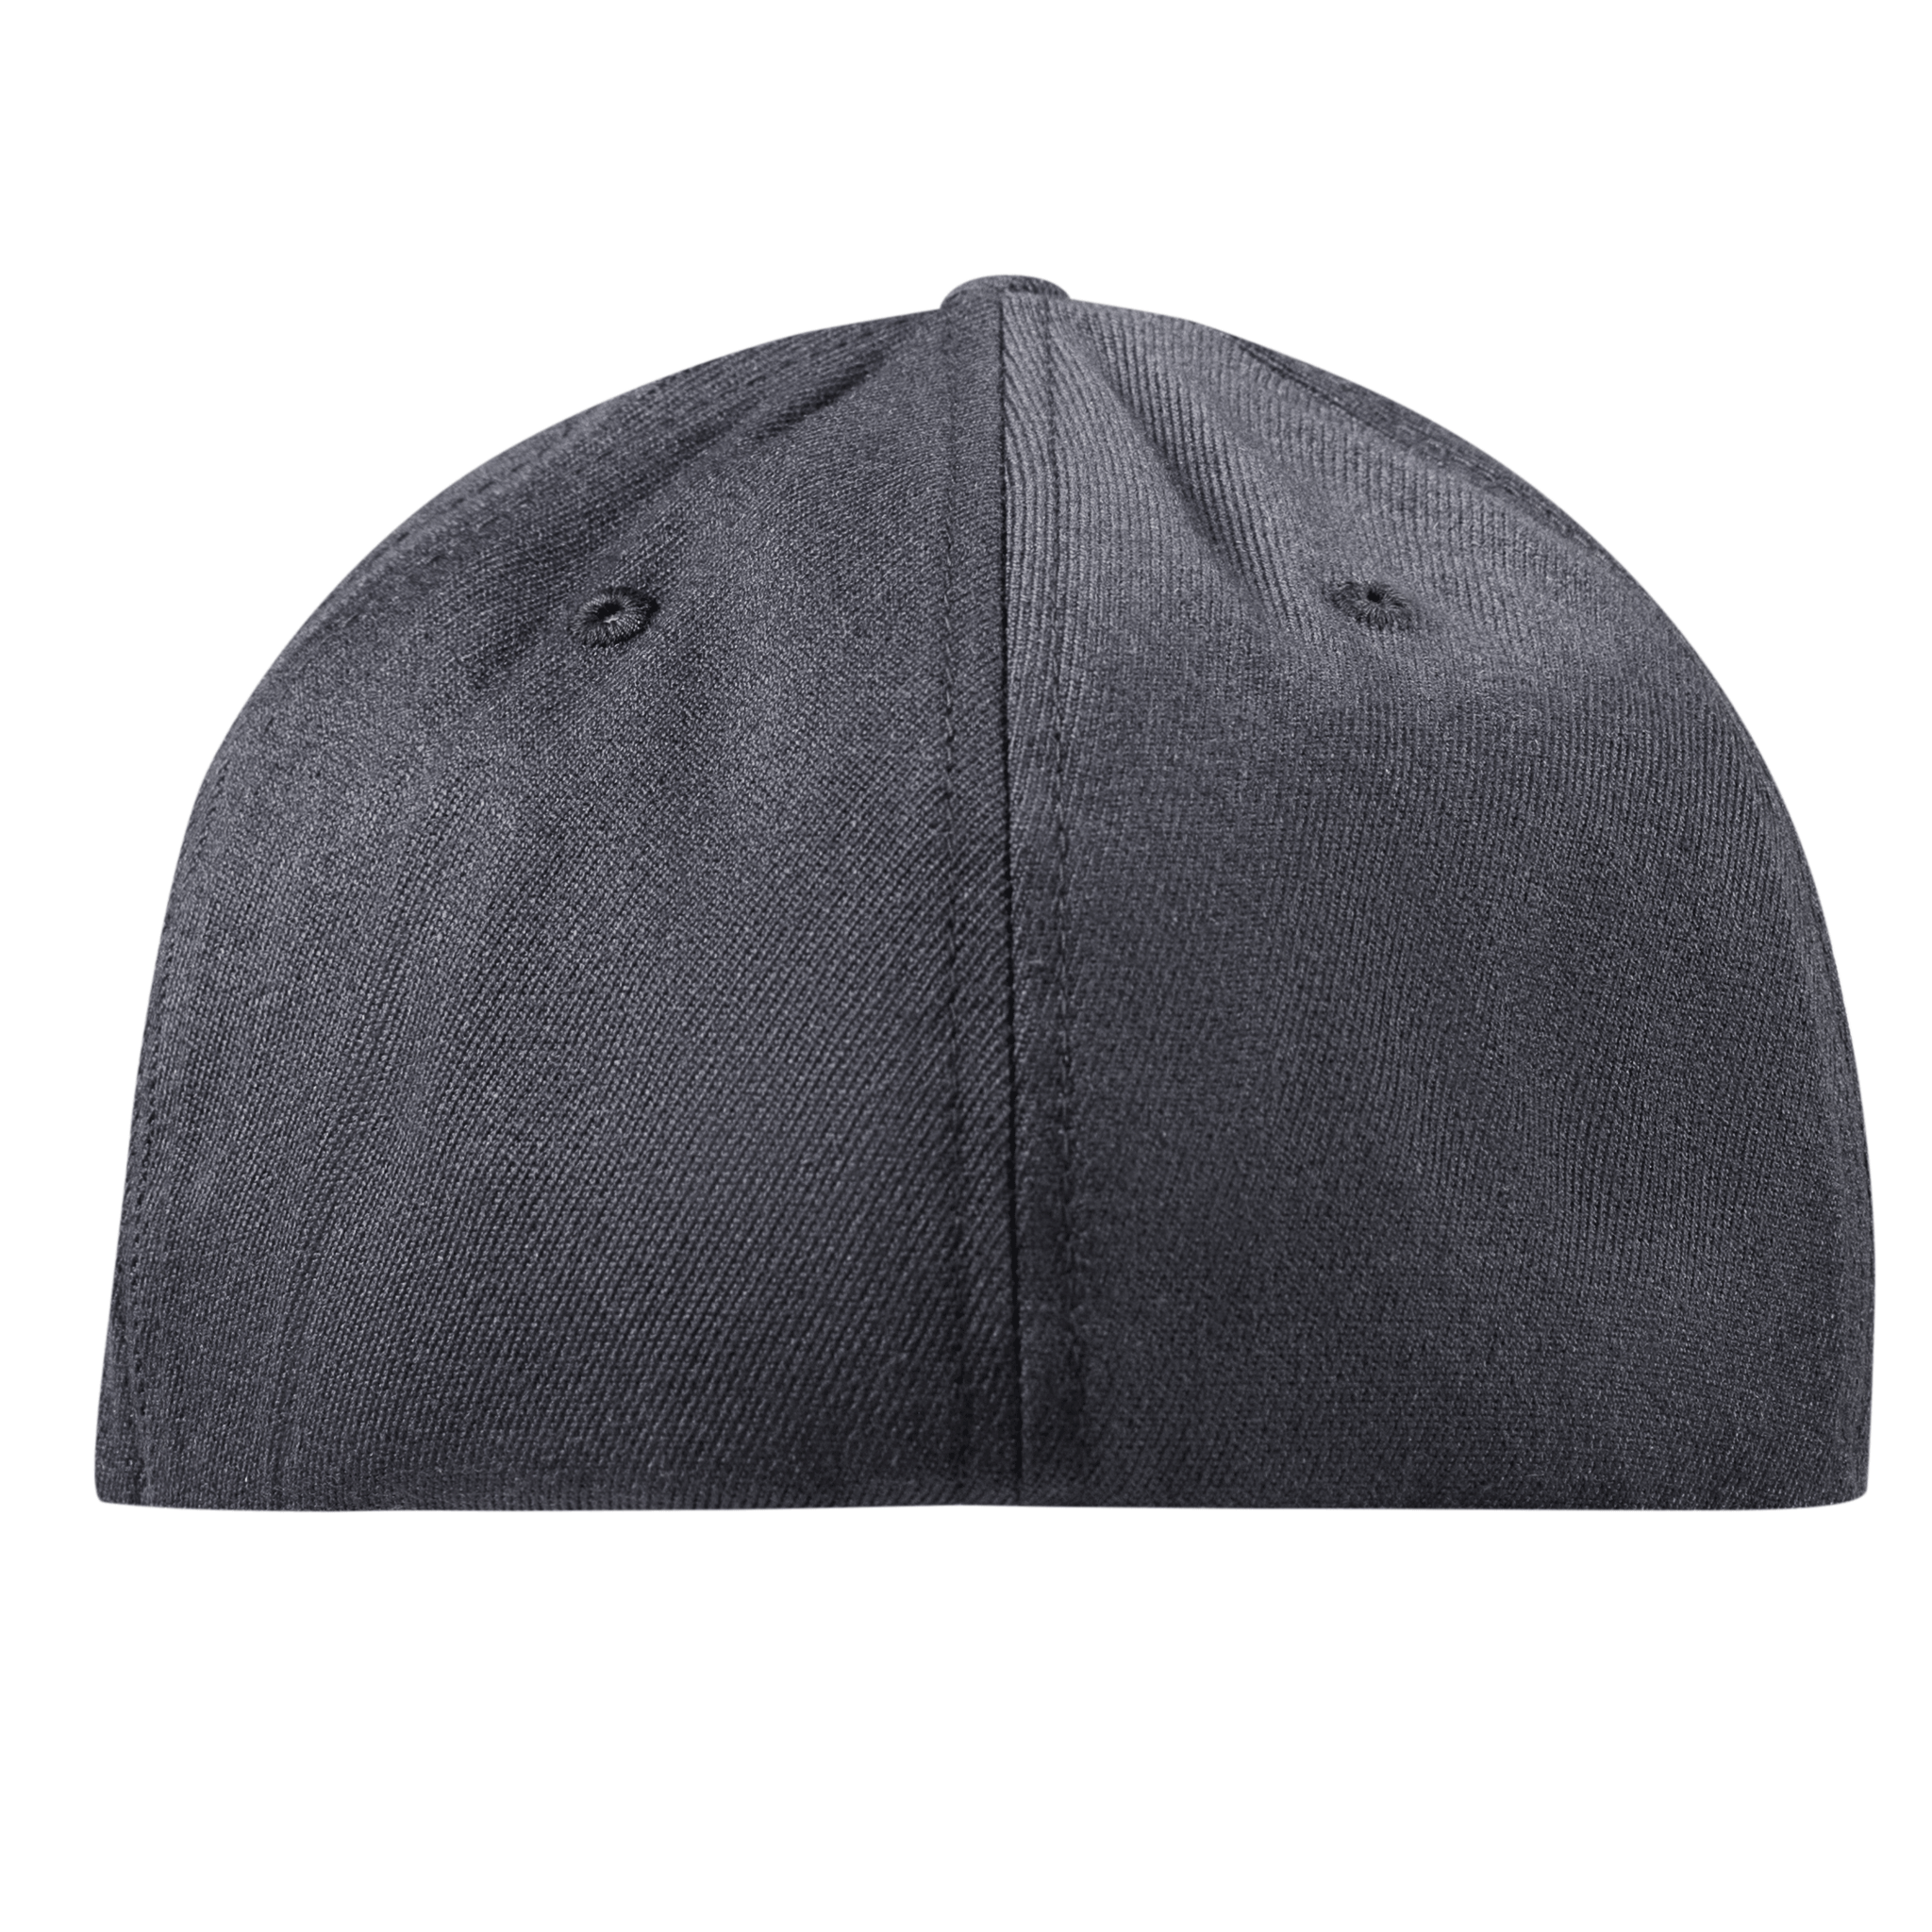 1776 Midnight Flexfit Fitted Back Charcoal